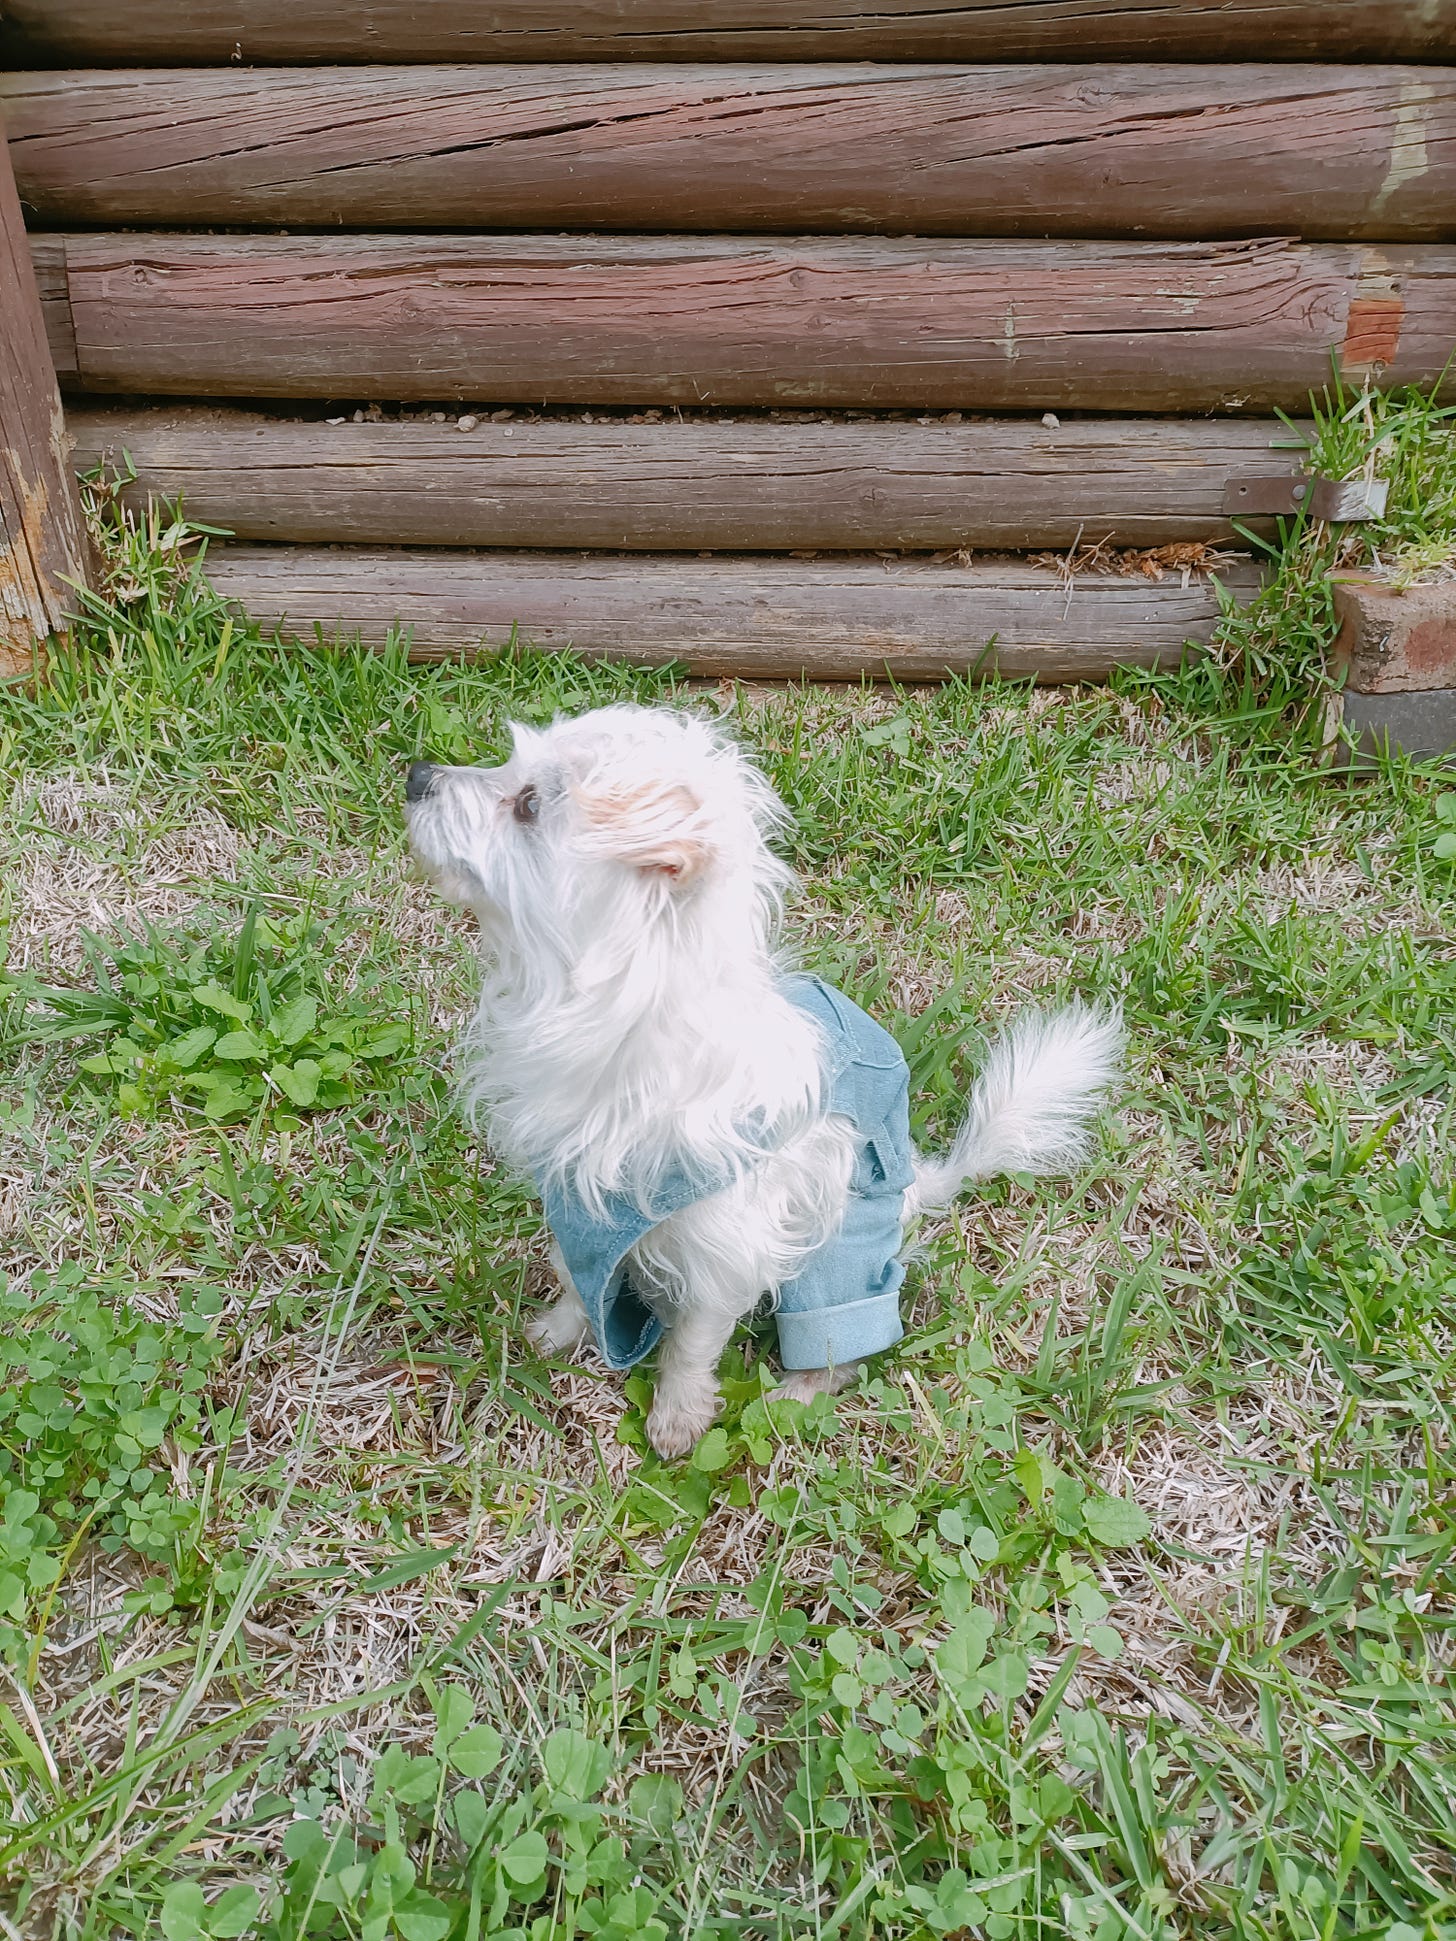 A photo of Donut, a puppy-sized Maltese mix with white fur, in a slightly overgrown backyard, near a wooden fence. He's wearing little light blue denim overalls and looks like an angel.